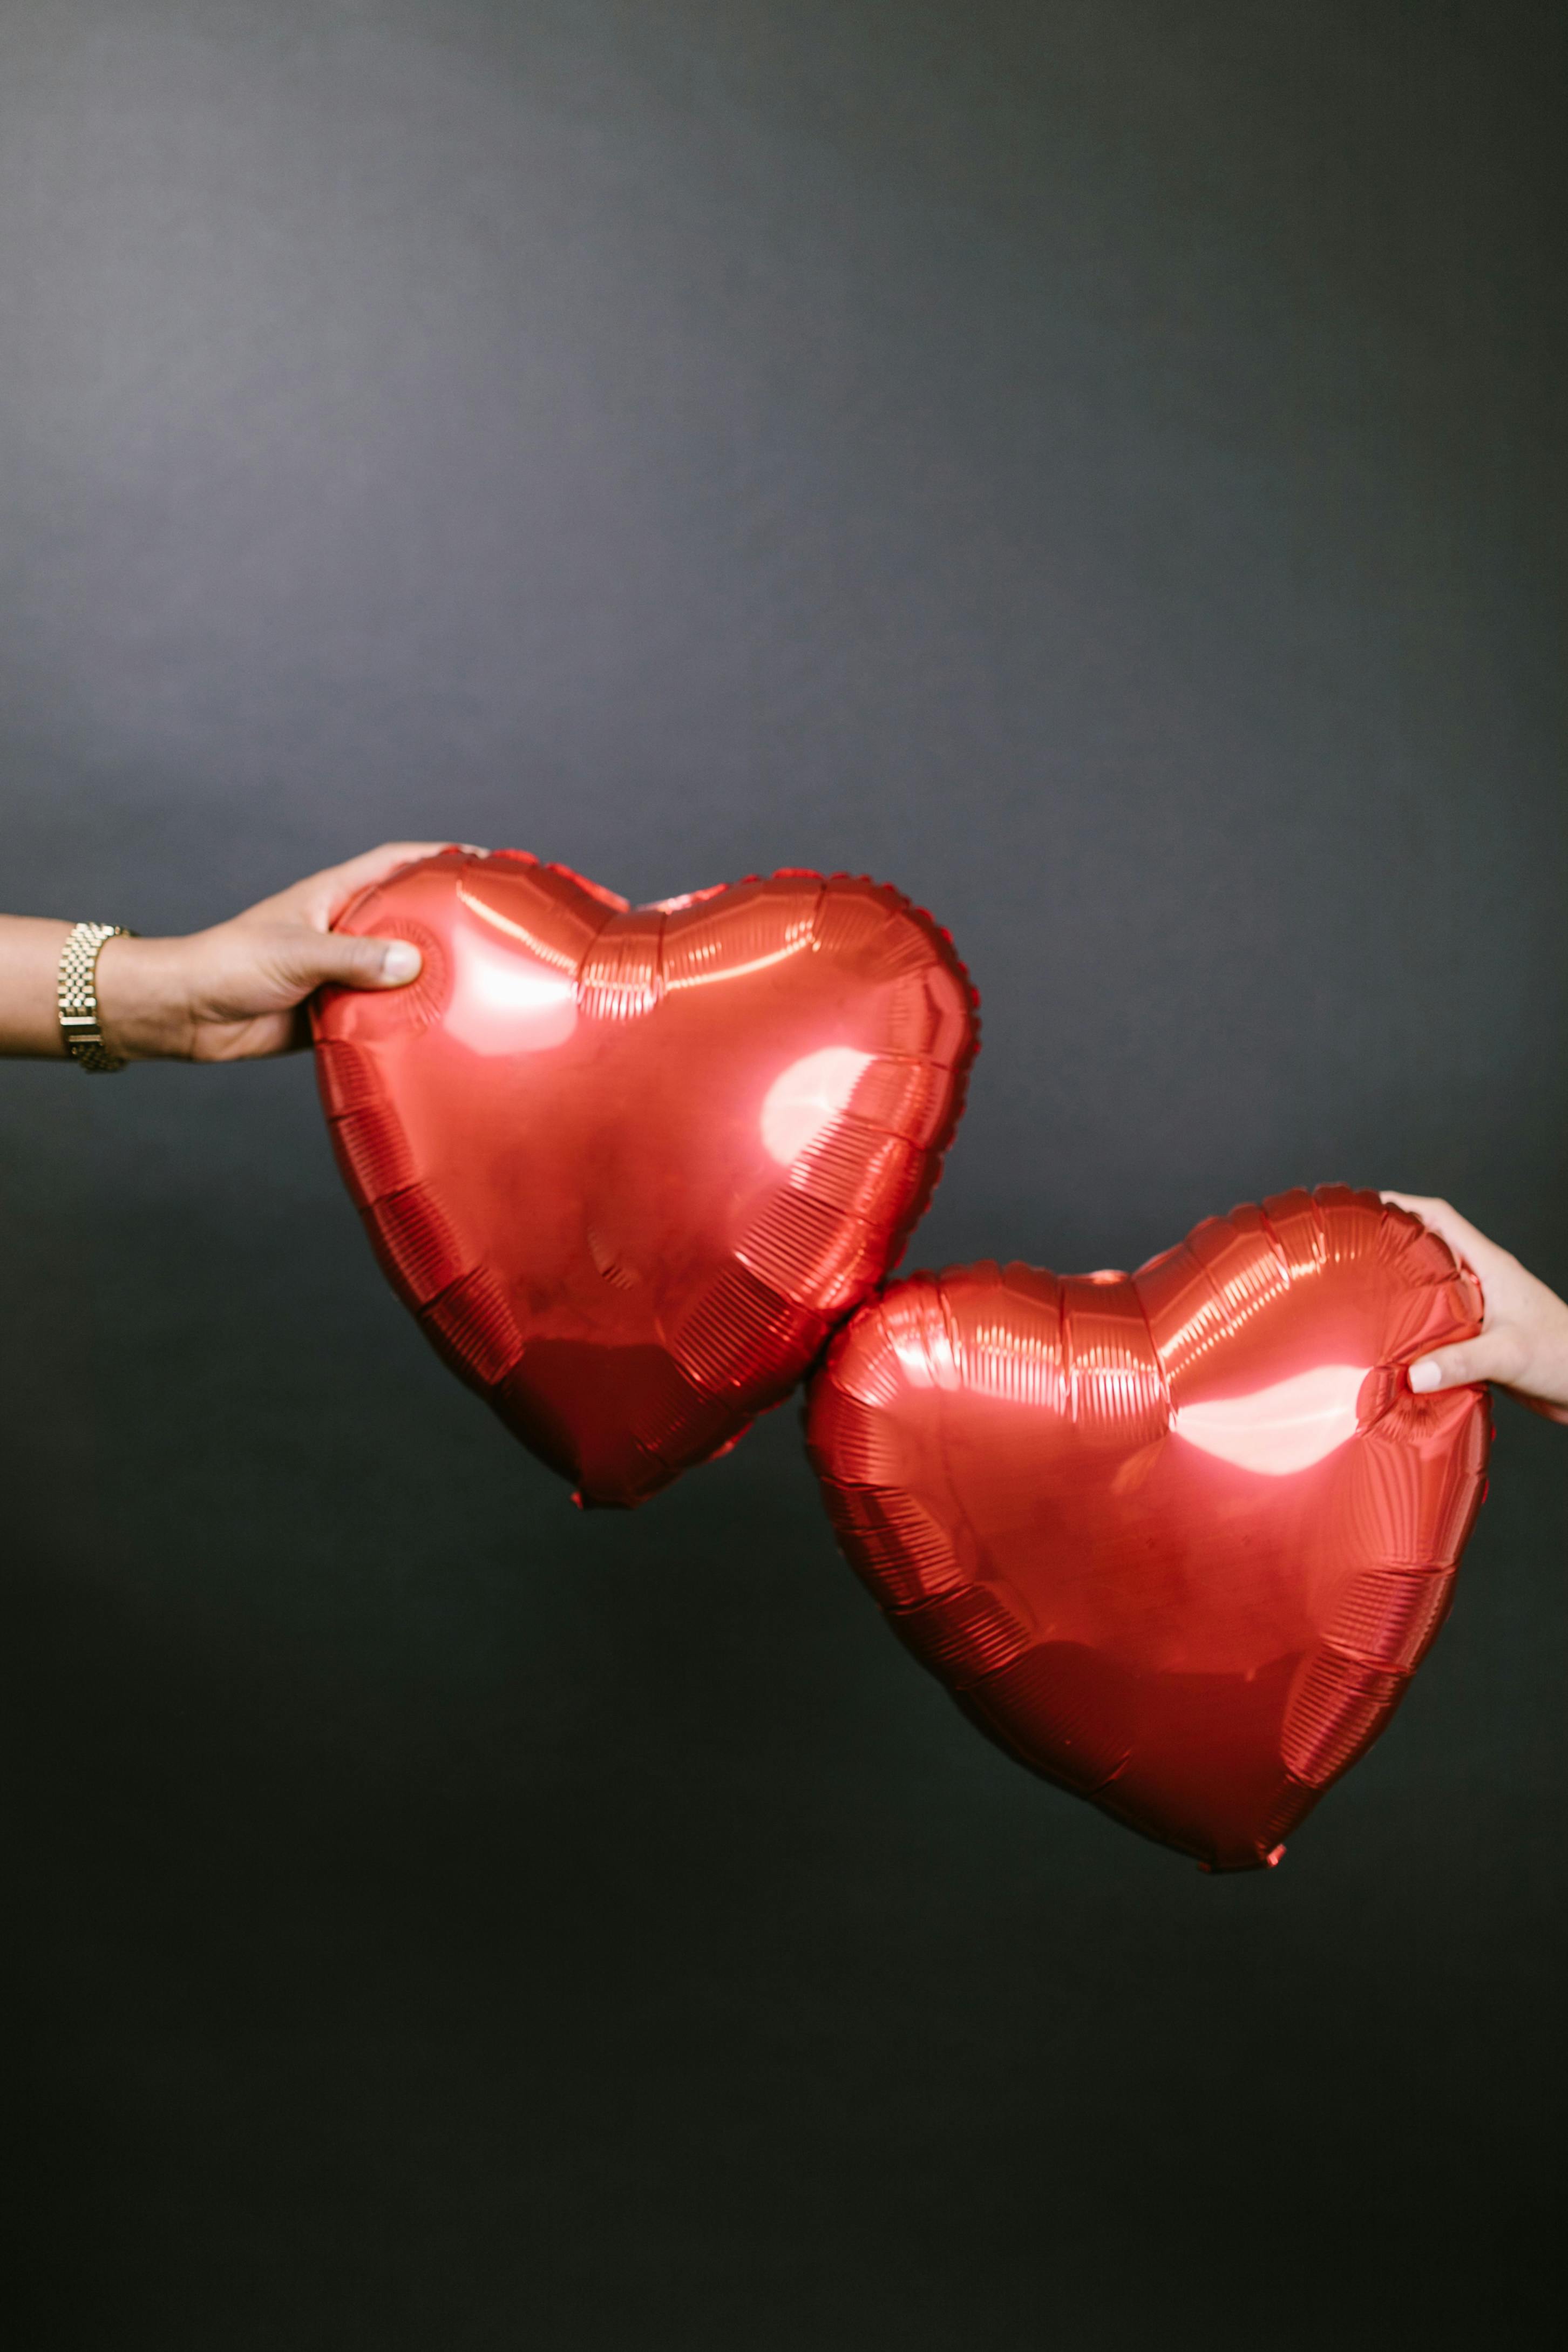 Two Red Heart Balloons on Black Background · Free Stock Photo